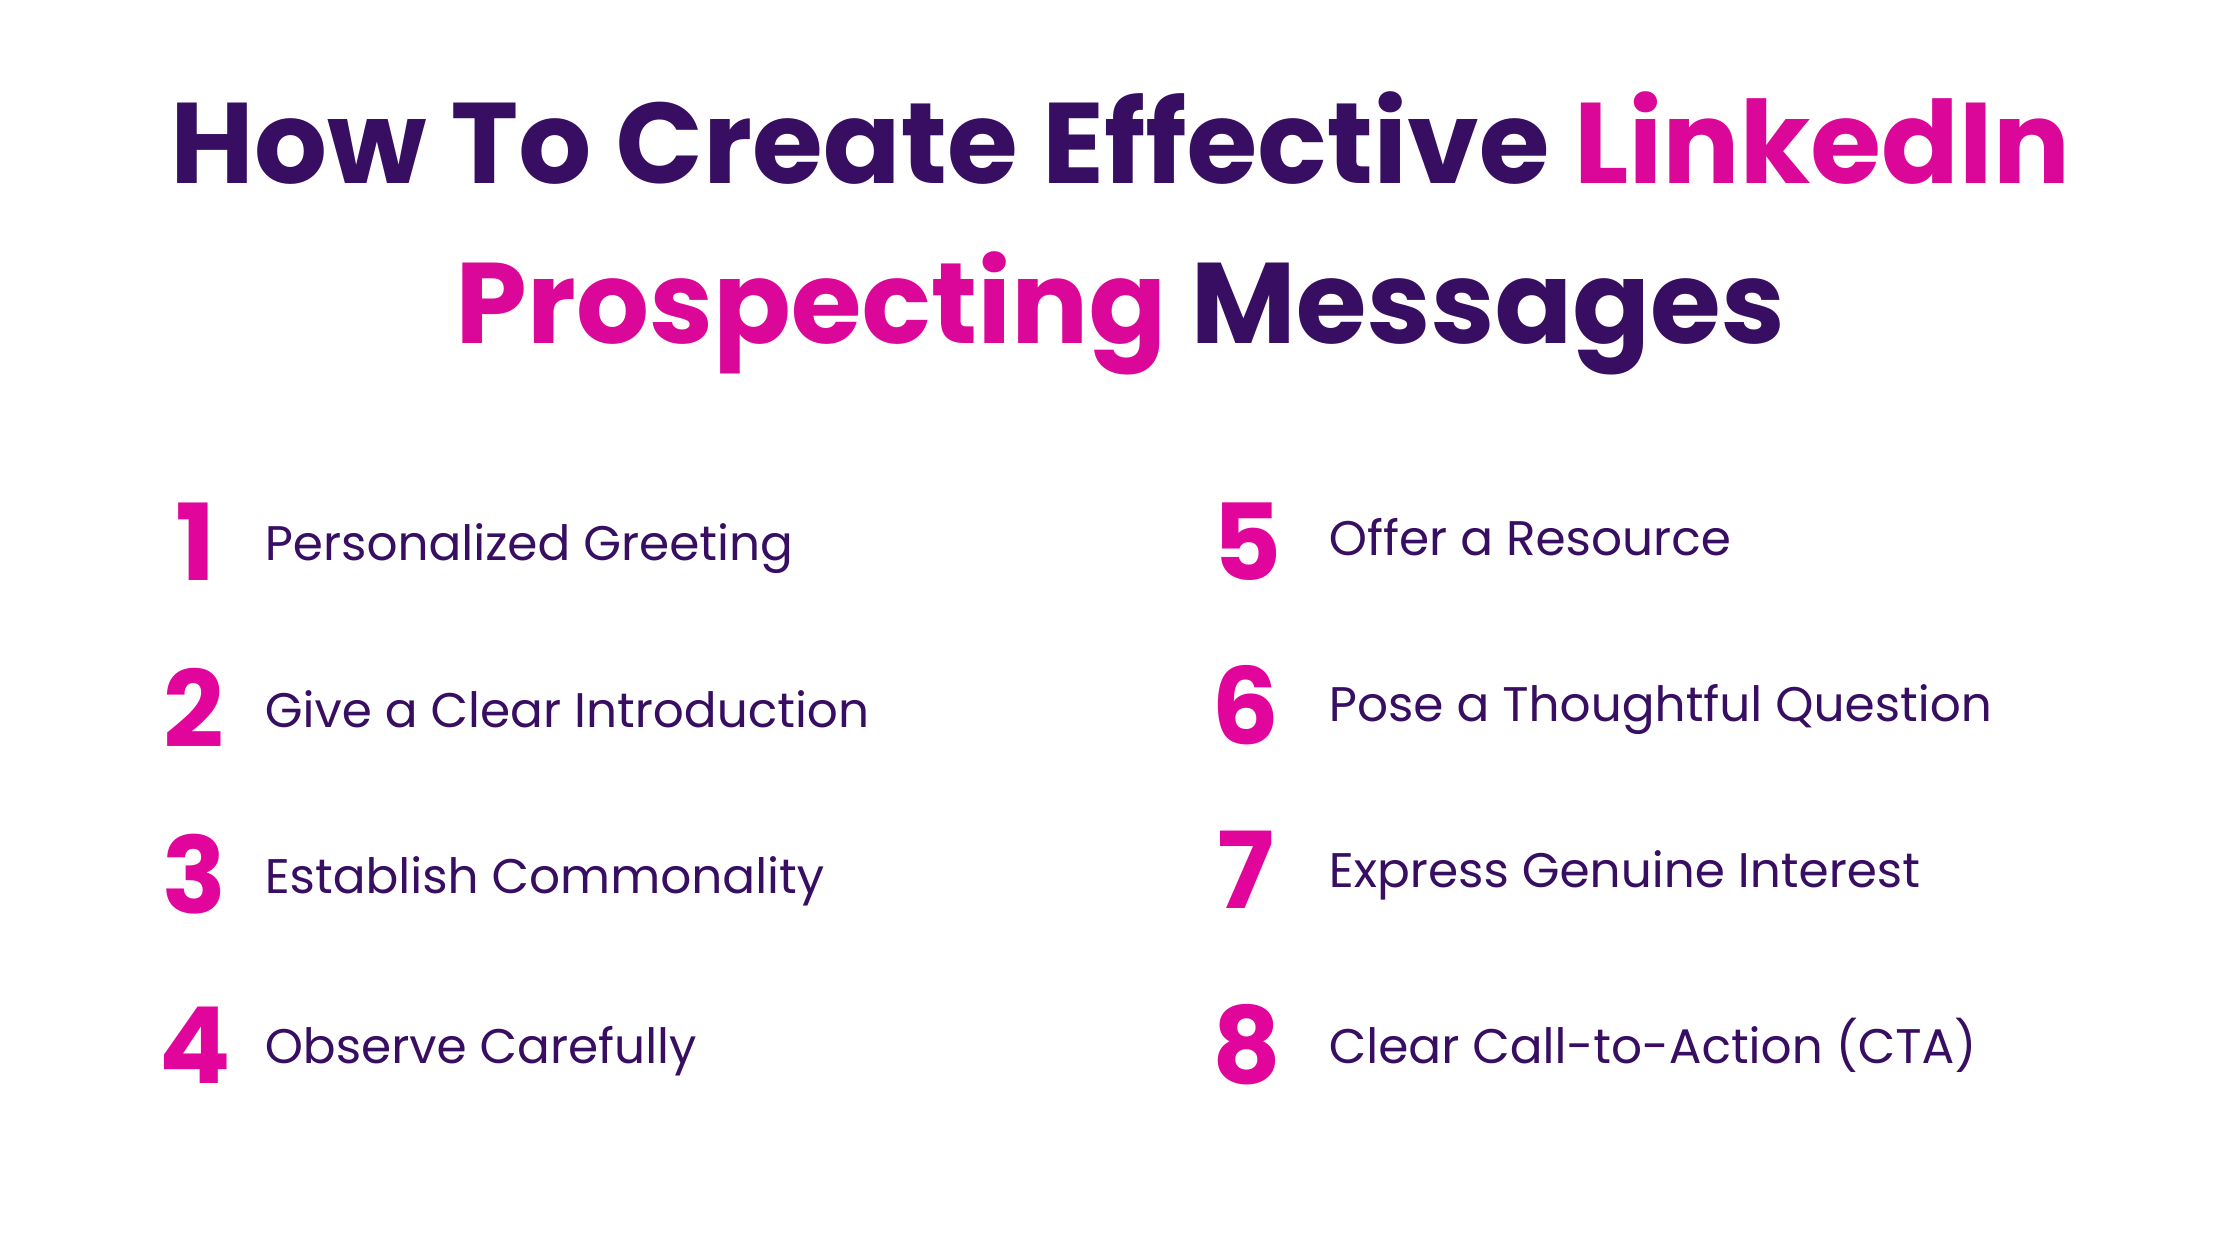 How To Create Effective LinkedIn Prospecting Messages